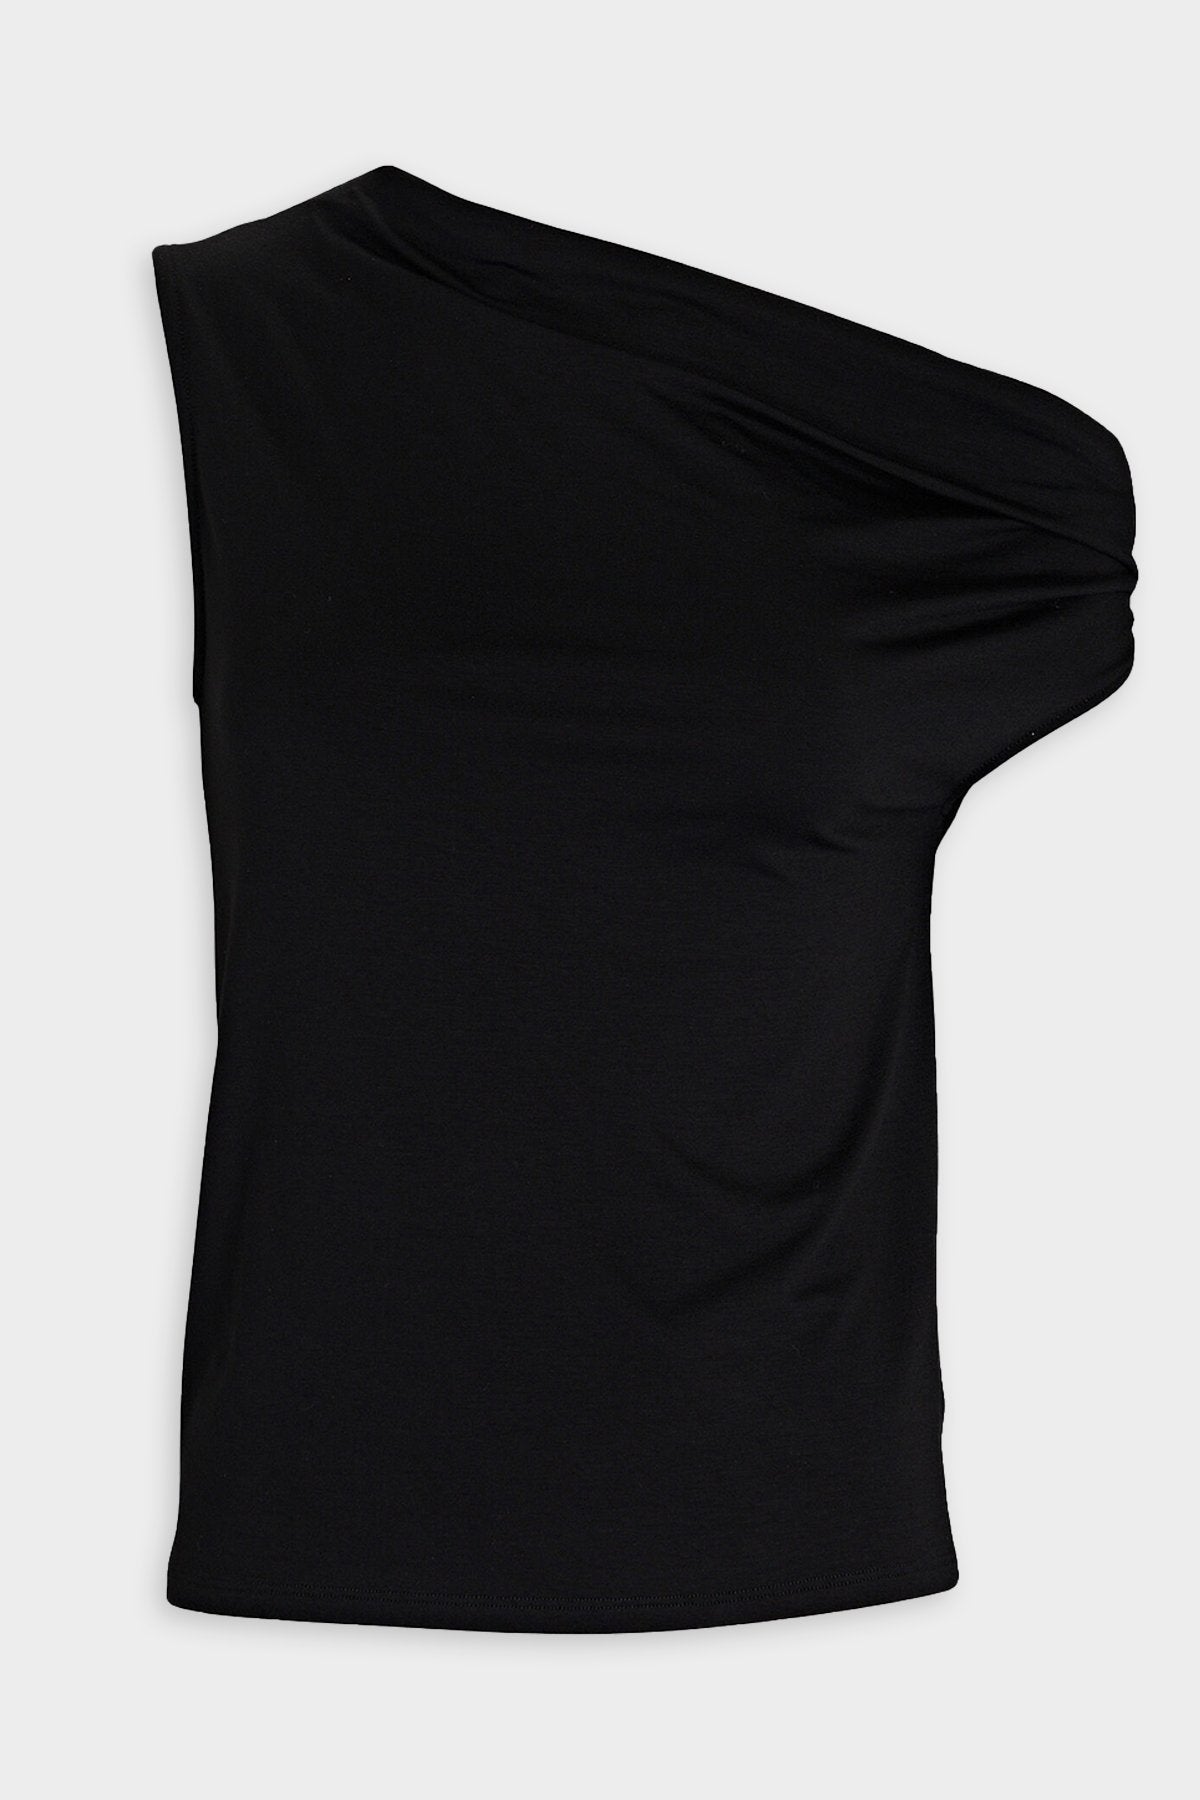 Luxe Knit Exposed Shoulder Easy Top in Black - shop-olivia.com